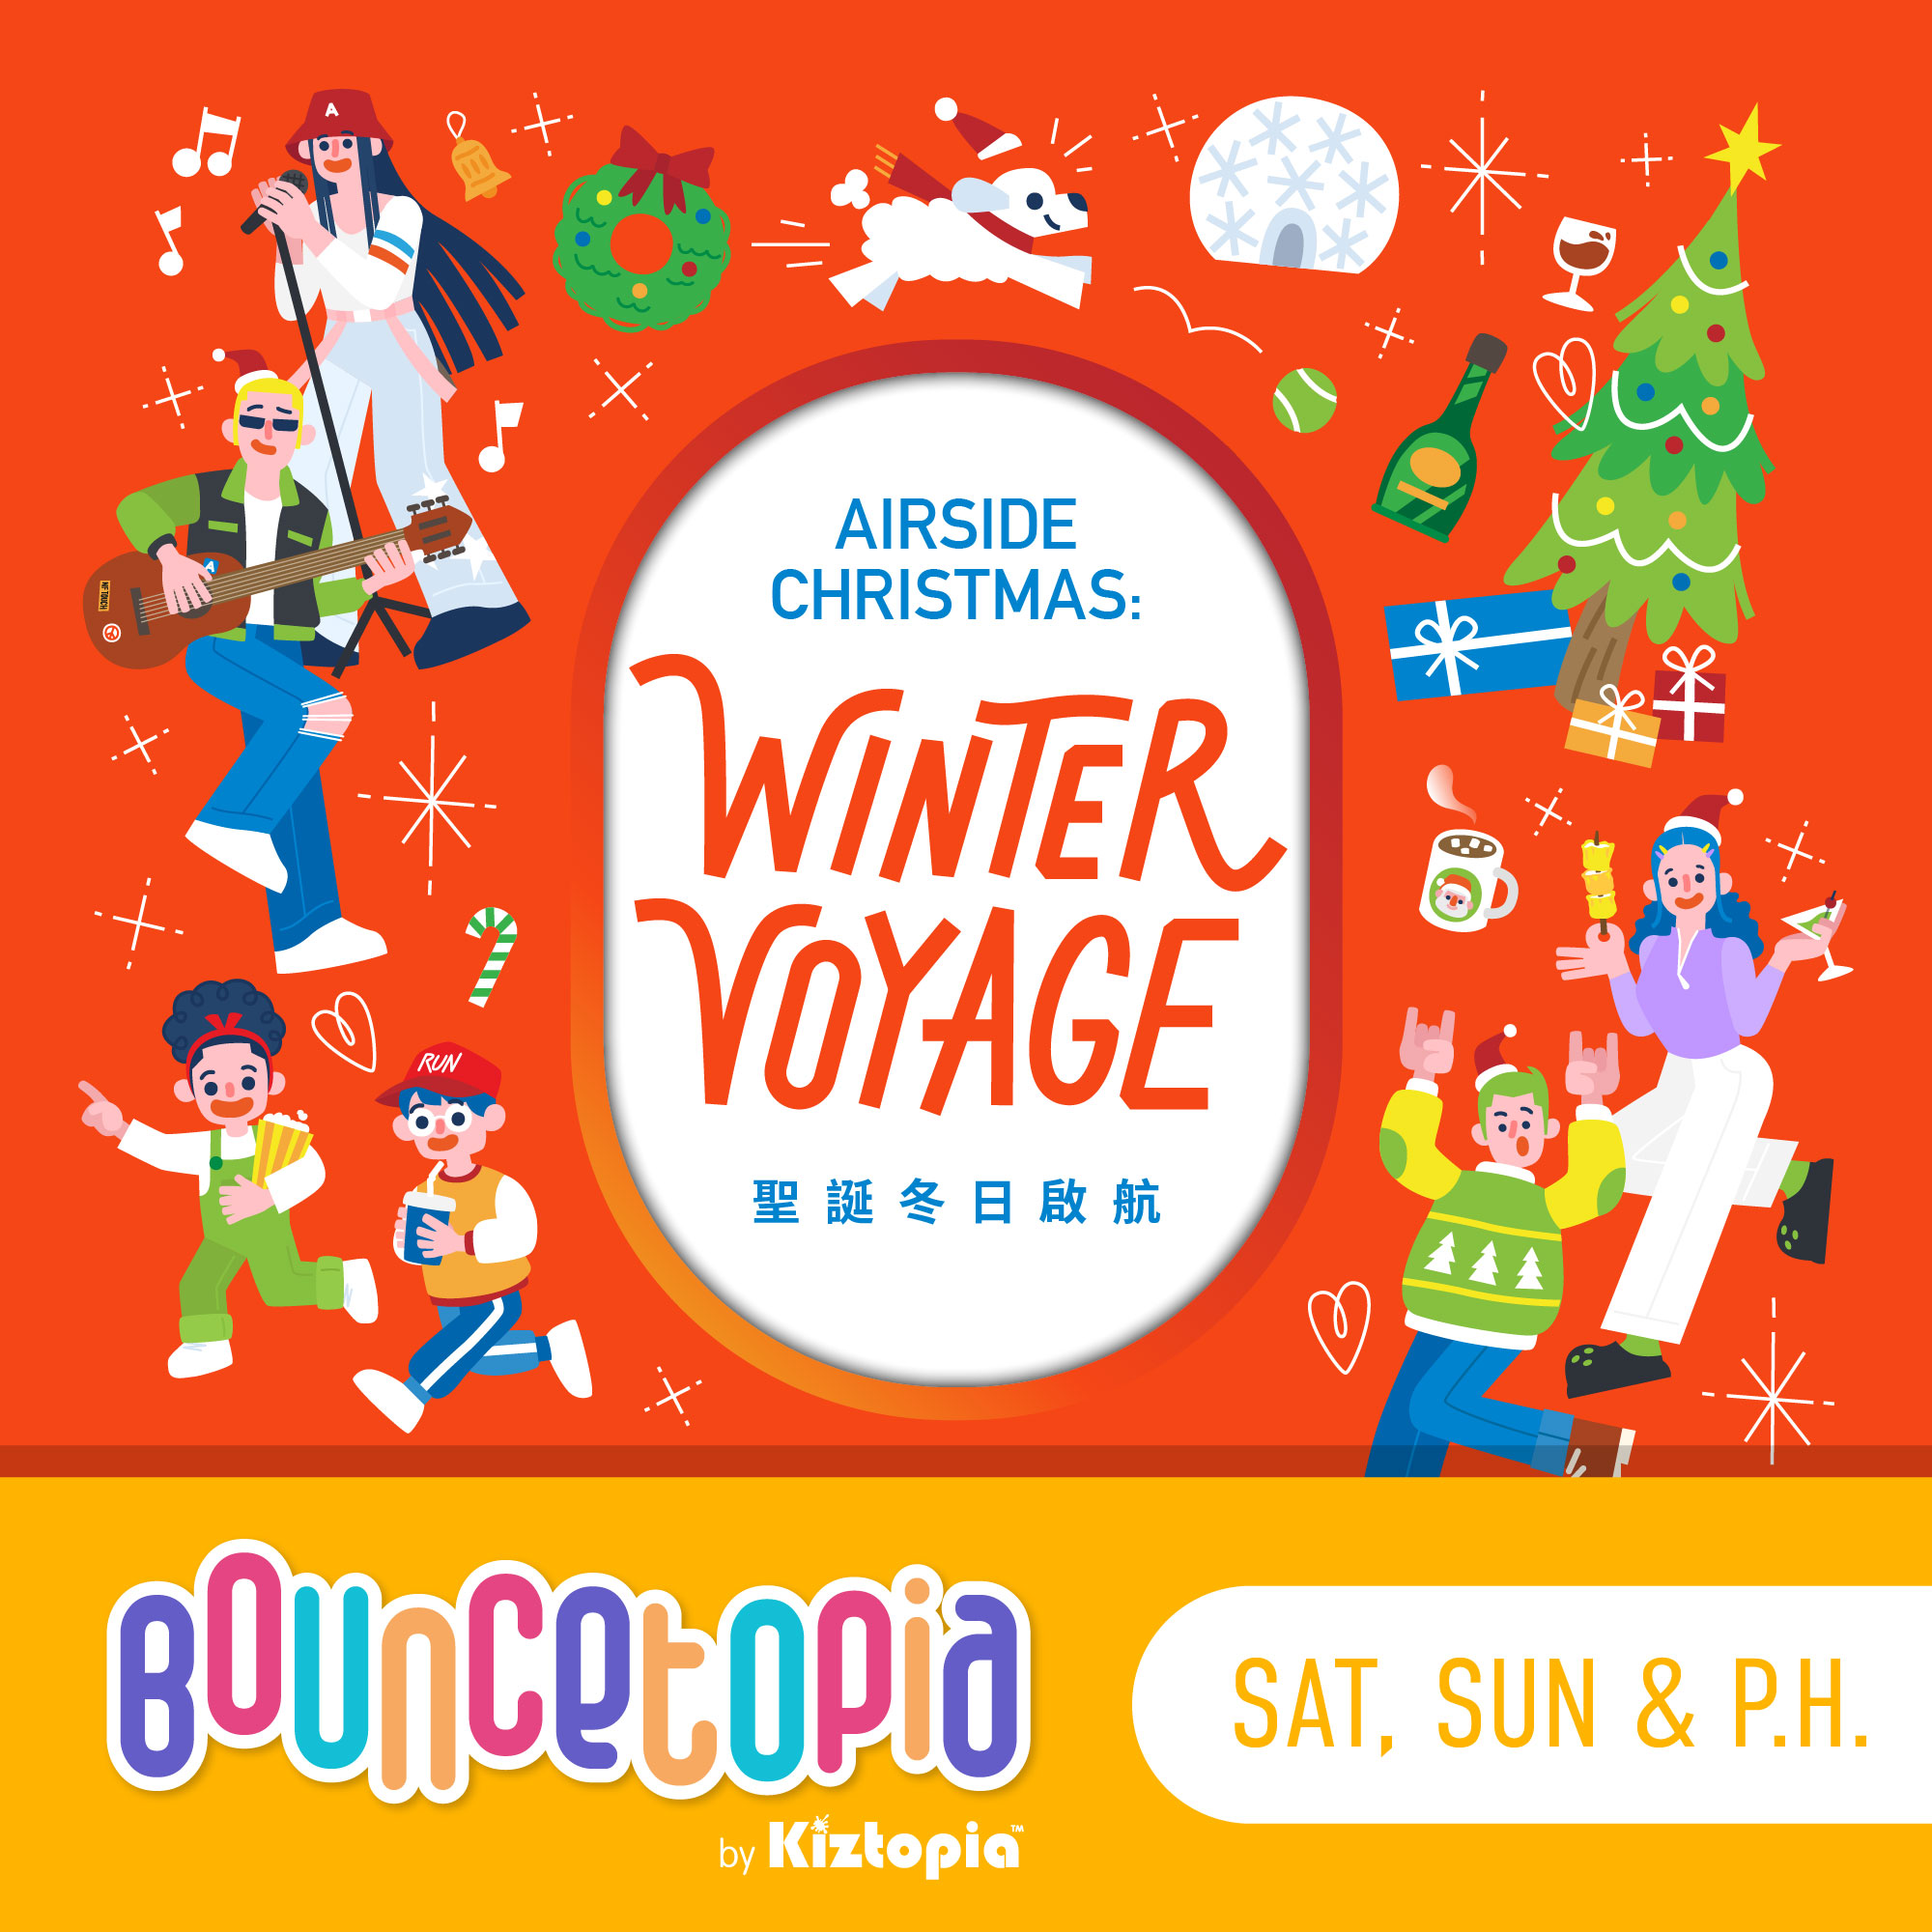 30-min Christmas Reimagined Flying Journey & 30-min Bouncetopia by Kiztopia Single Admission Ticket (Sat, Sun & Public Holiday)